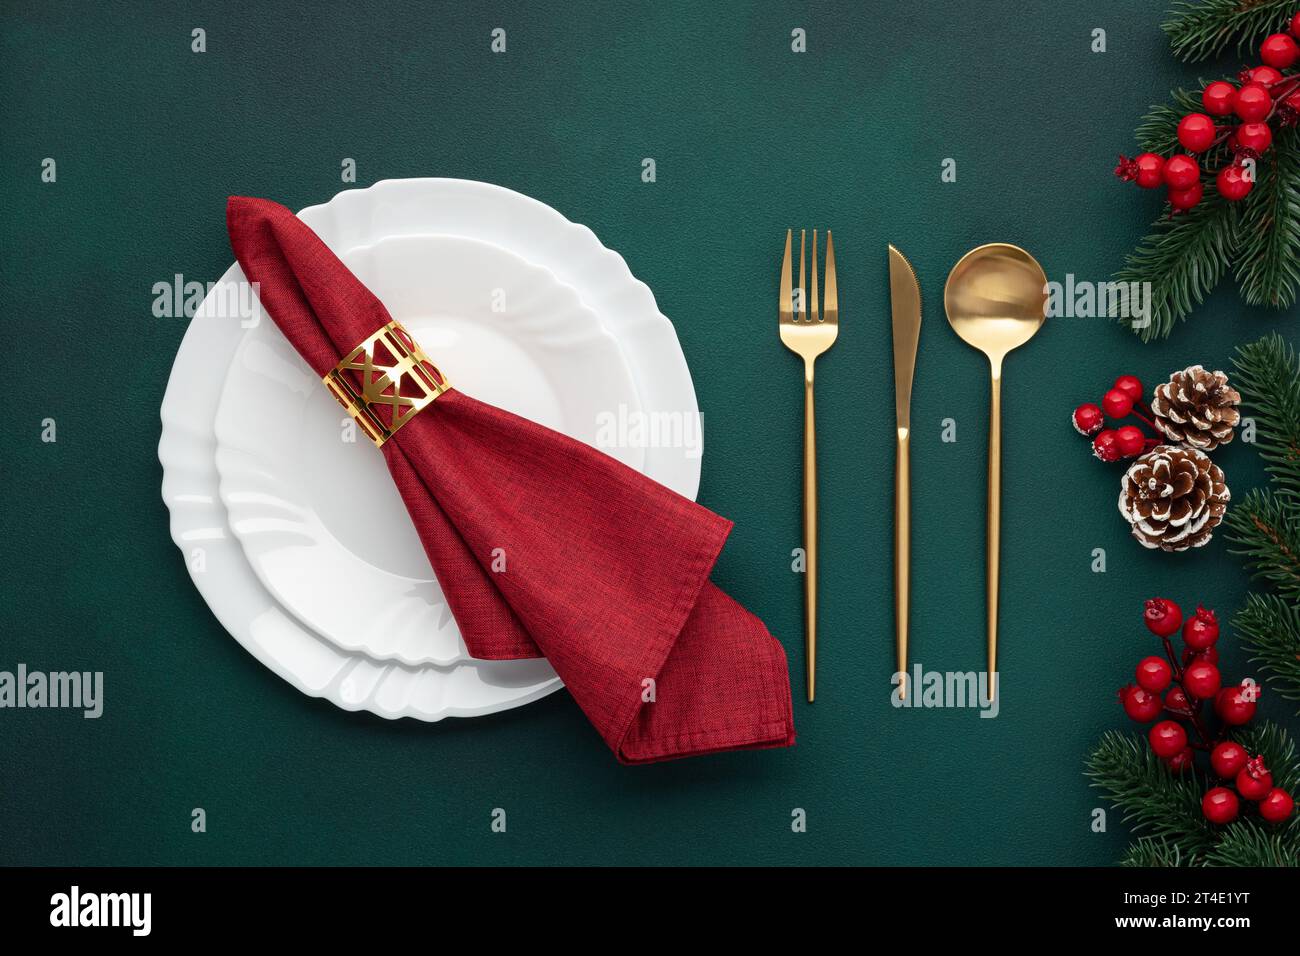 Clean plate, gold cutlery. Festive table setting with christmas decorations. Celebration xmas eve: flat arrangement. Red, golden accents. Fir cones on Stock Photo